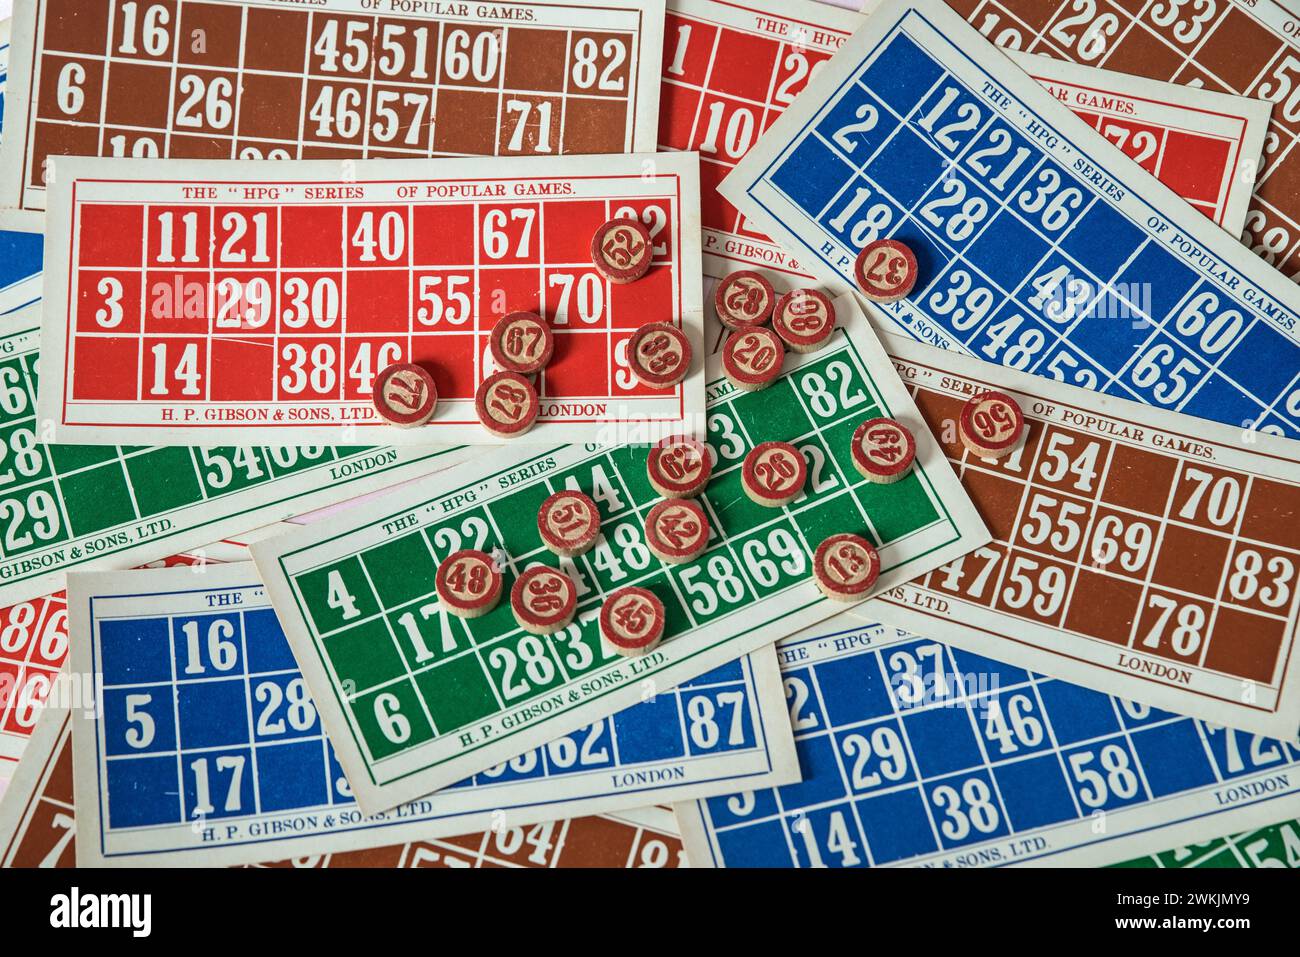 Game cards and wooden number playing pieces of a 1950s Bingo or Lotto game by H.P. Gibson & Sons Stock Photo